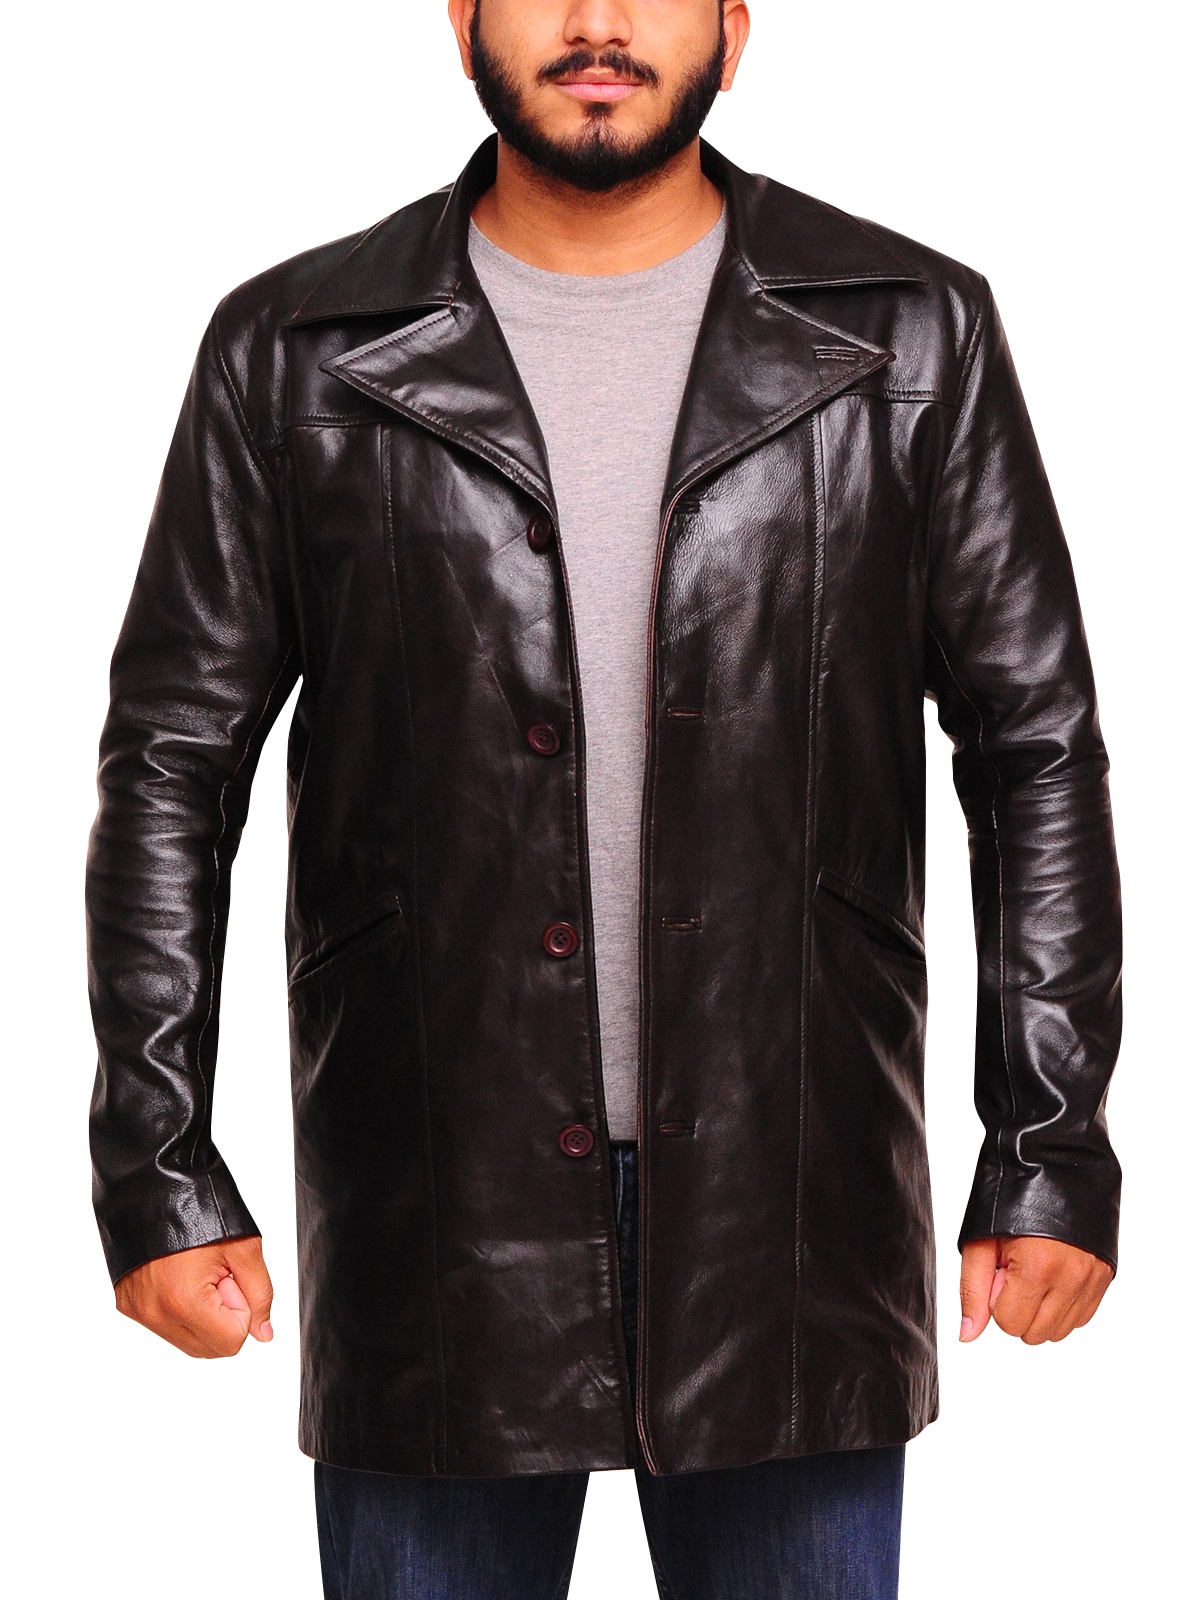 Dominic West The Wire Series Leather Coat - A2 Jackets